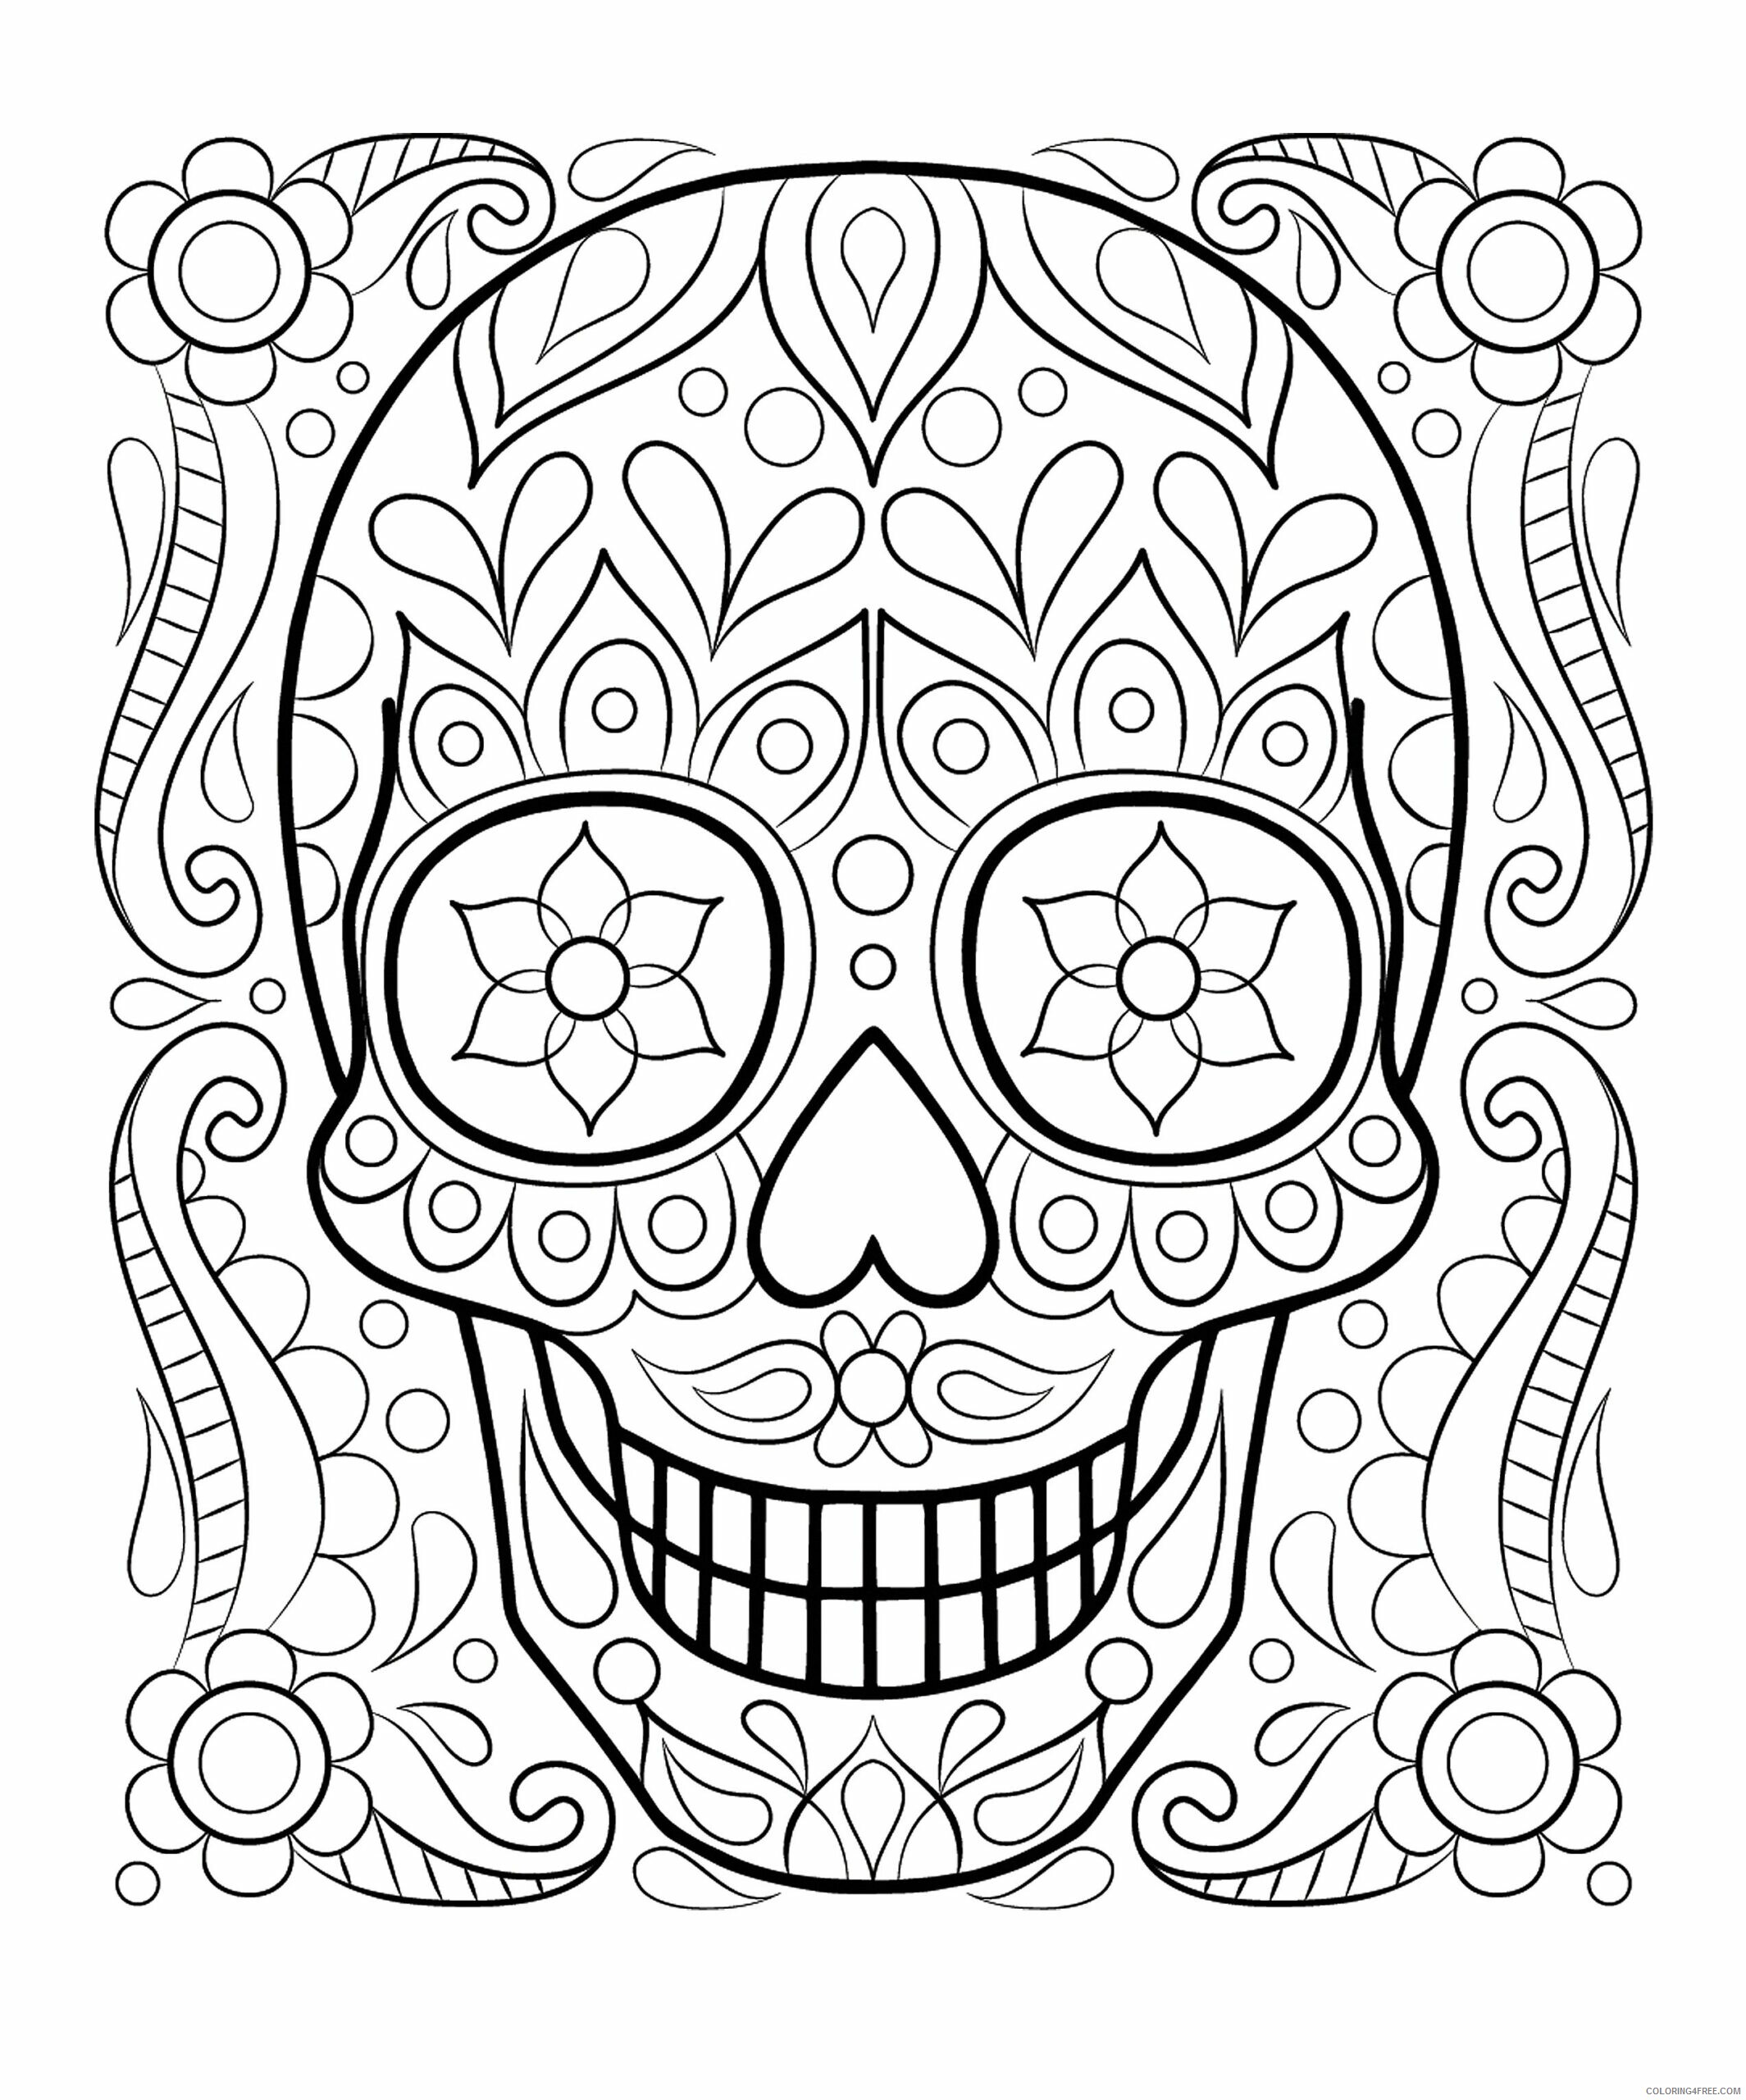 Adult Coloring Pages Skull Printable Sheets Free Sugar Skull Page 2021 a 2114 Coloring4free